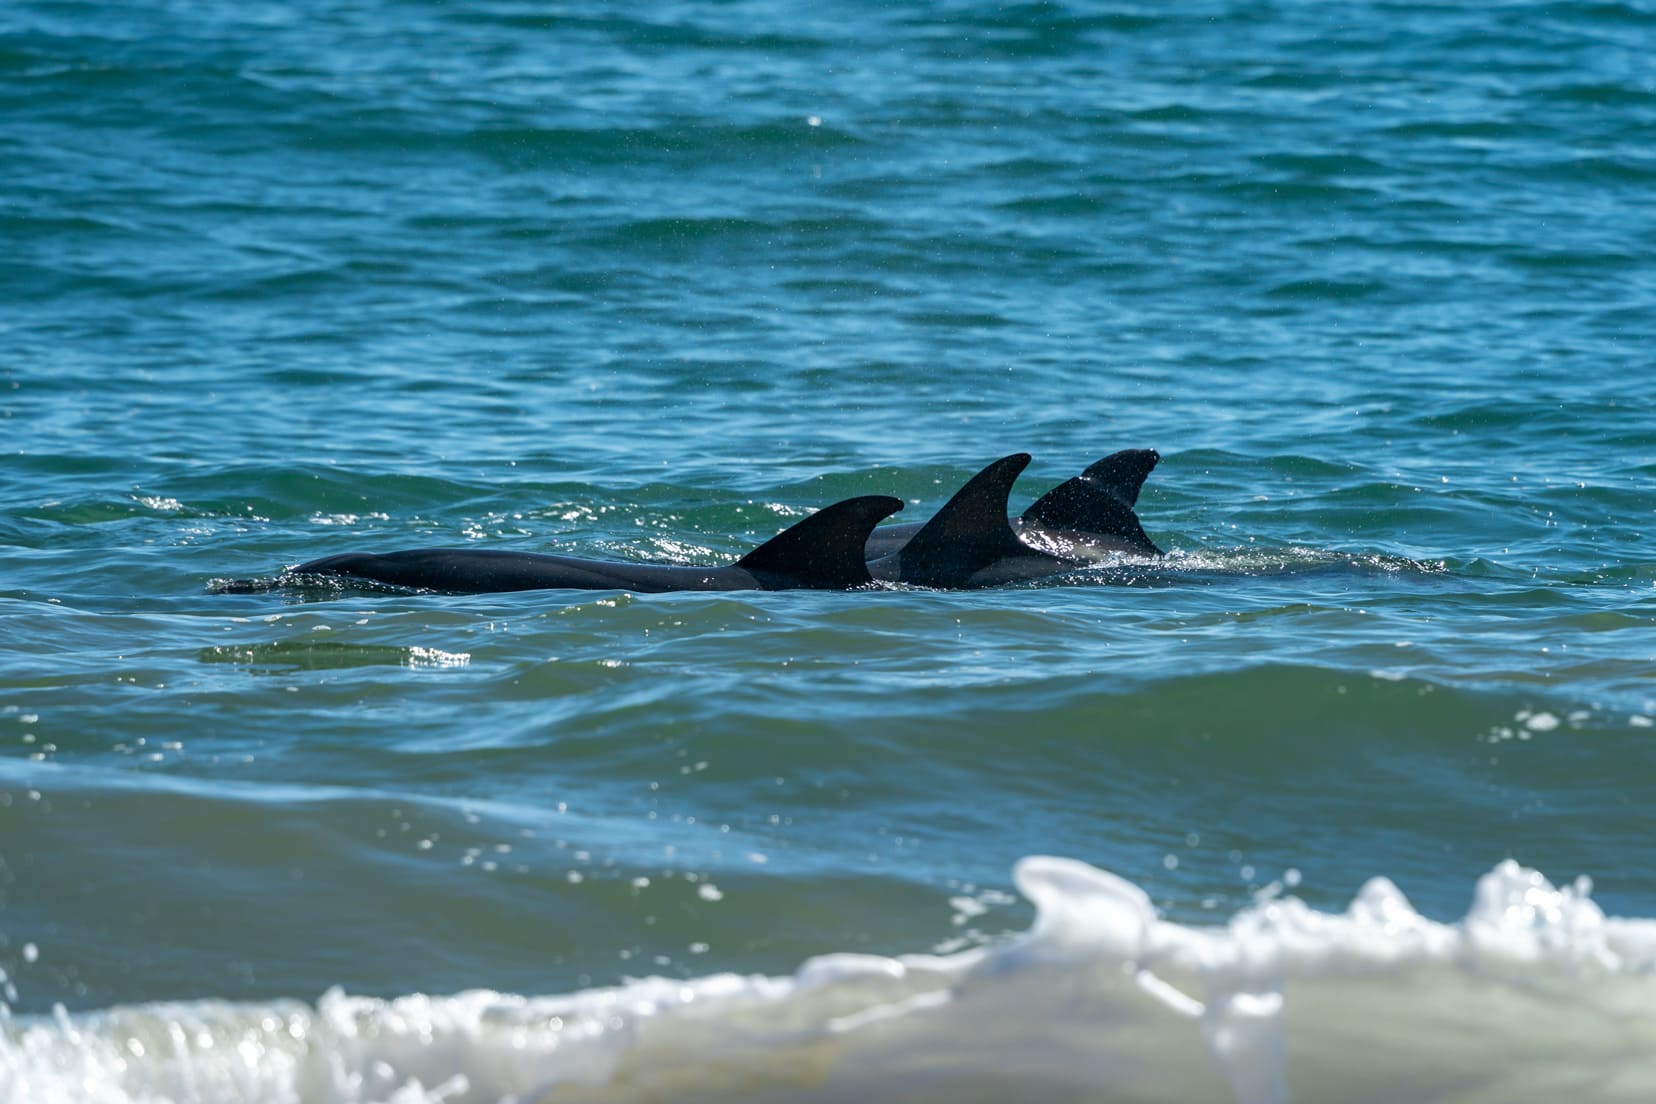 Three dolphin fins showing in the ocean